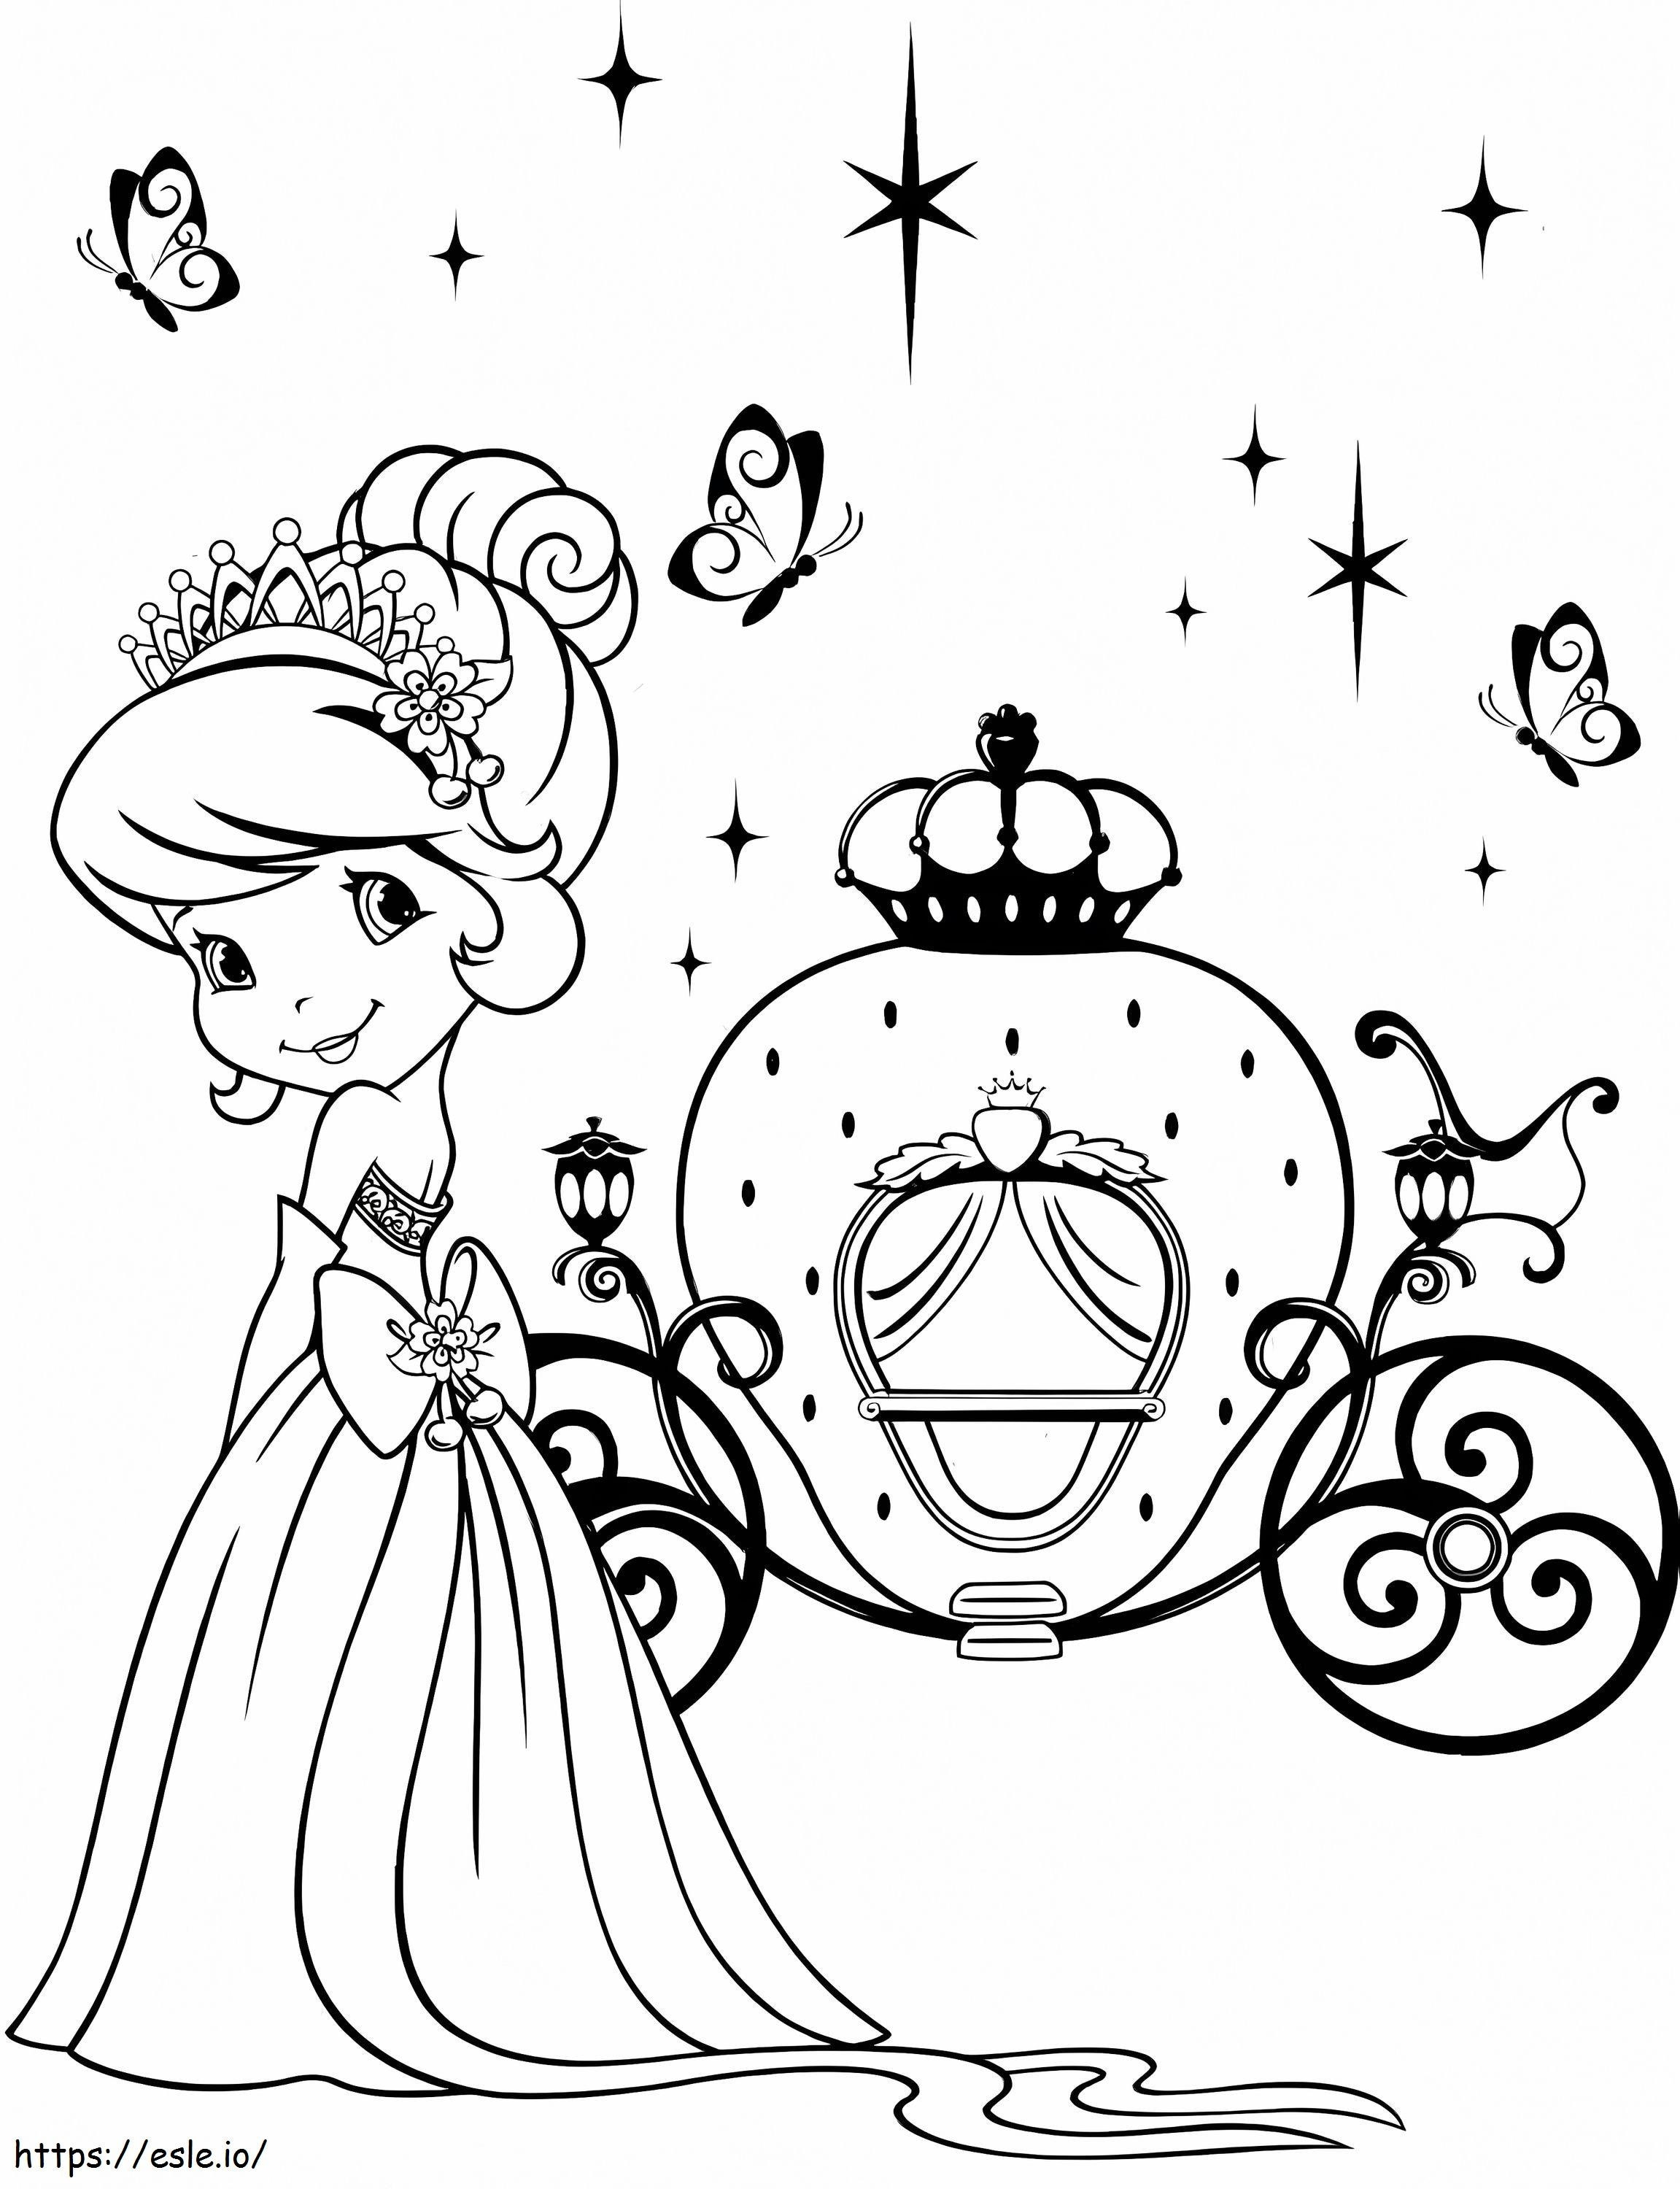 Strawberry Shortcake And Magic Carriage coloring page